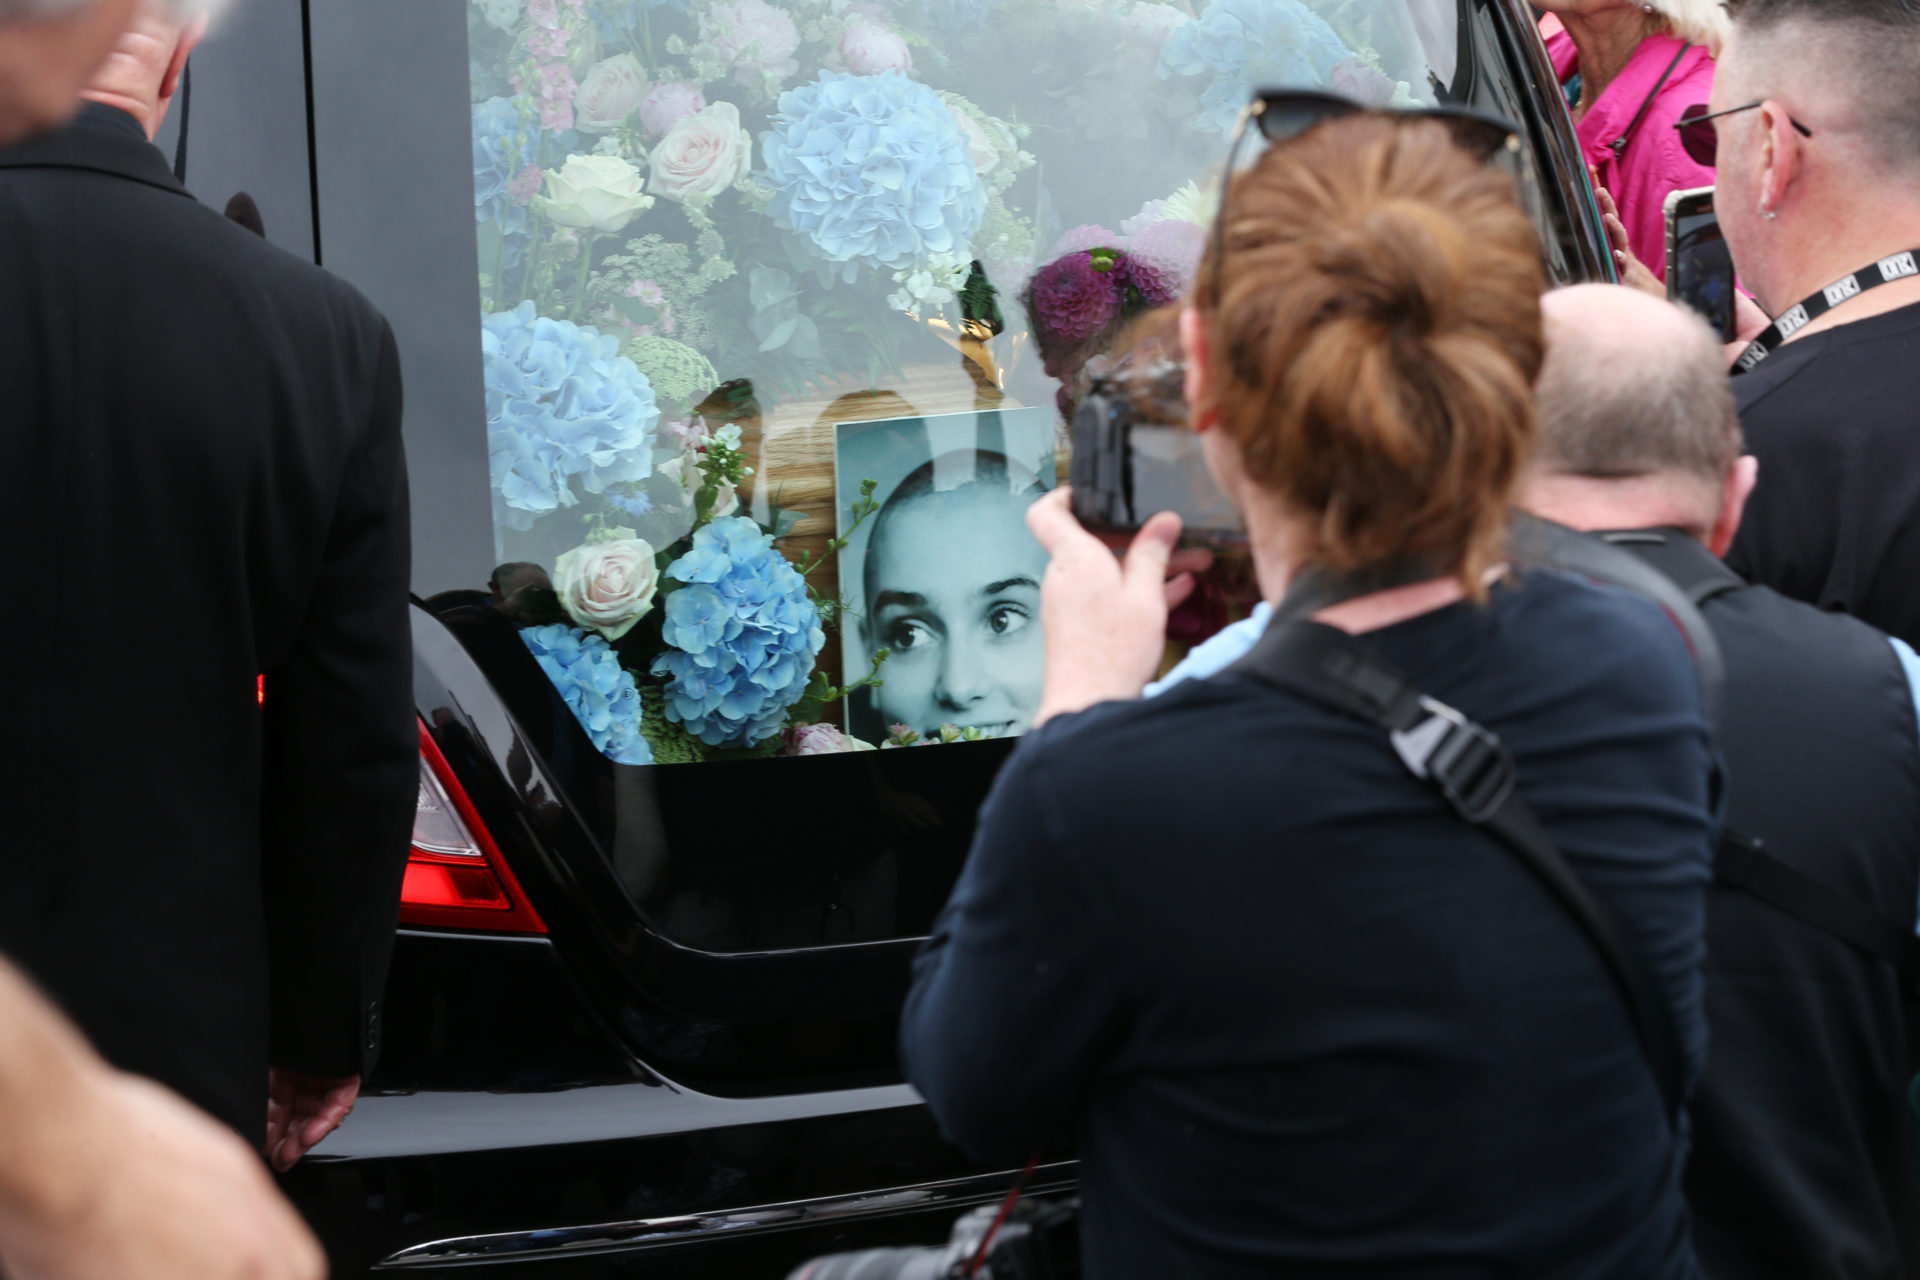 The hearse carrying Sinead O'Connor's body passes by crowds of well-wishers and mourners lining the Bray seafront ahead of her funeral